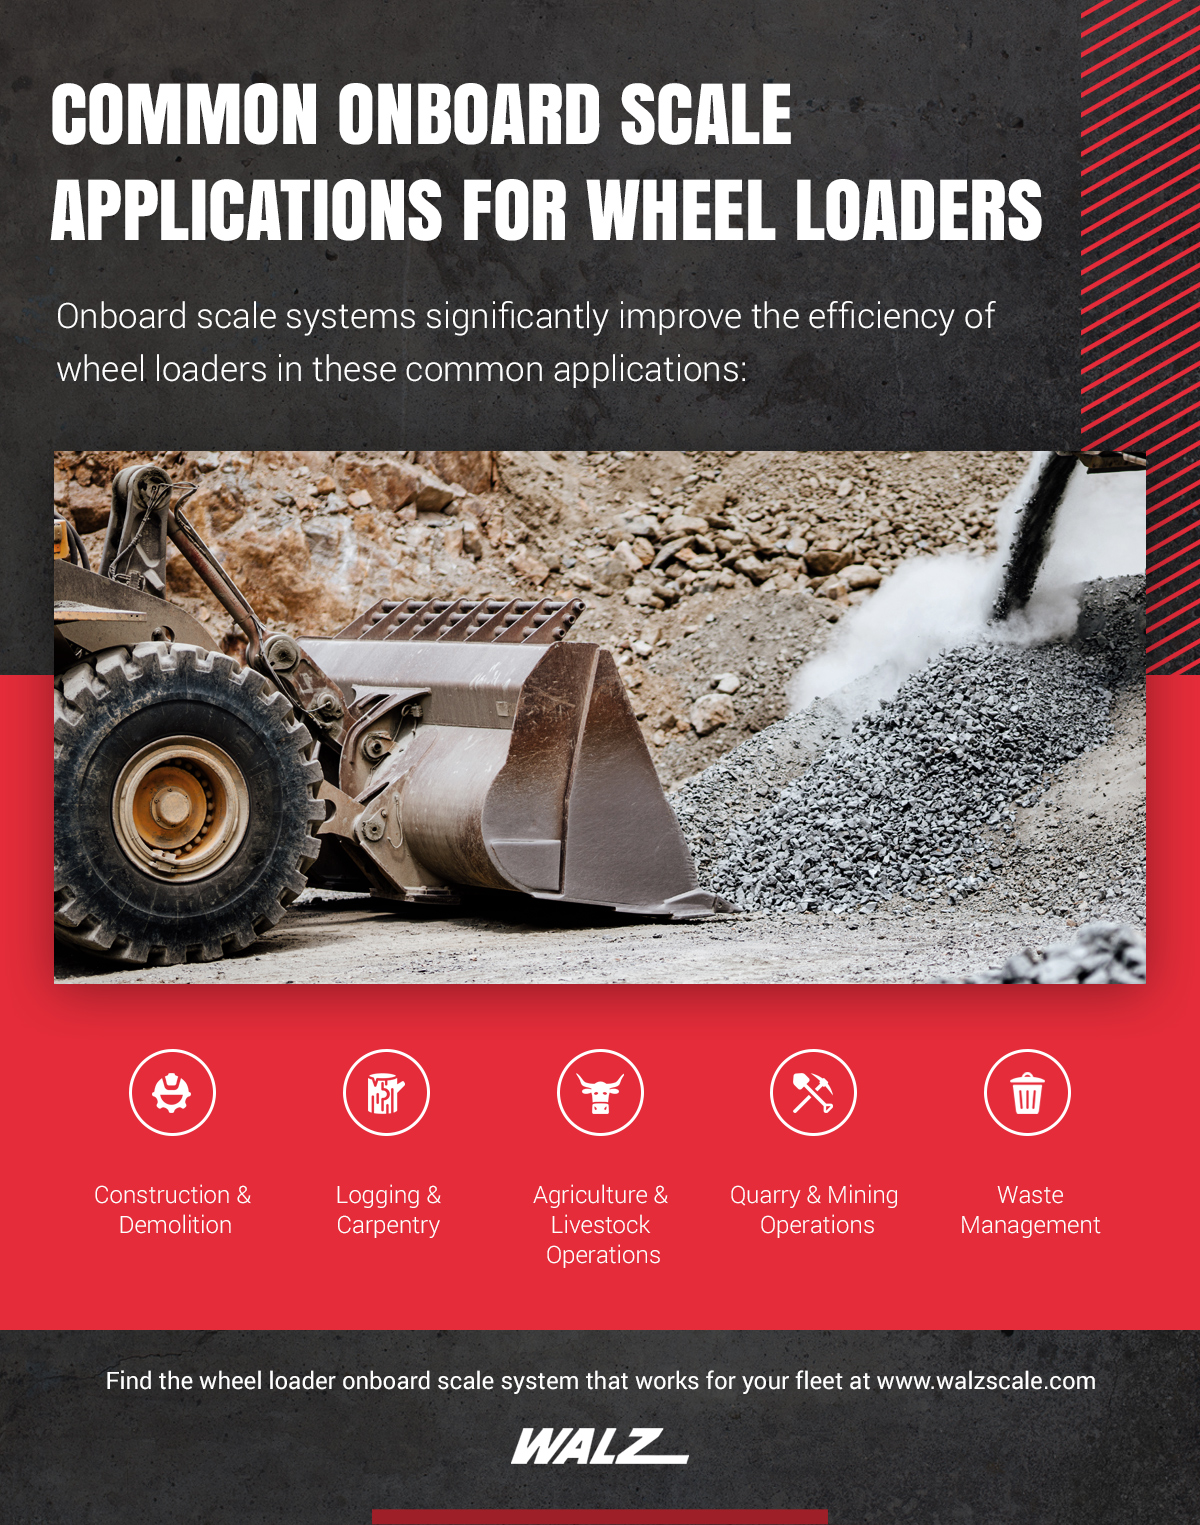 Common-Onboard-Scale-Applications-for-Wheel-Loaders-infographic